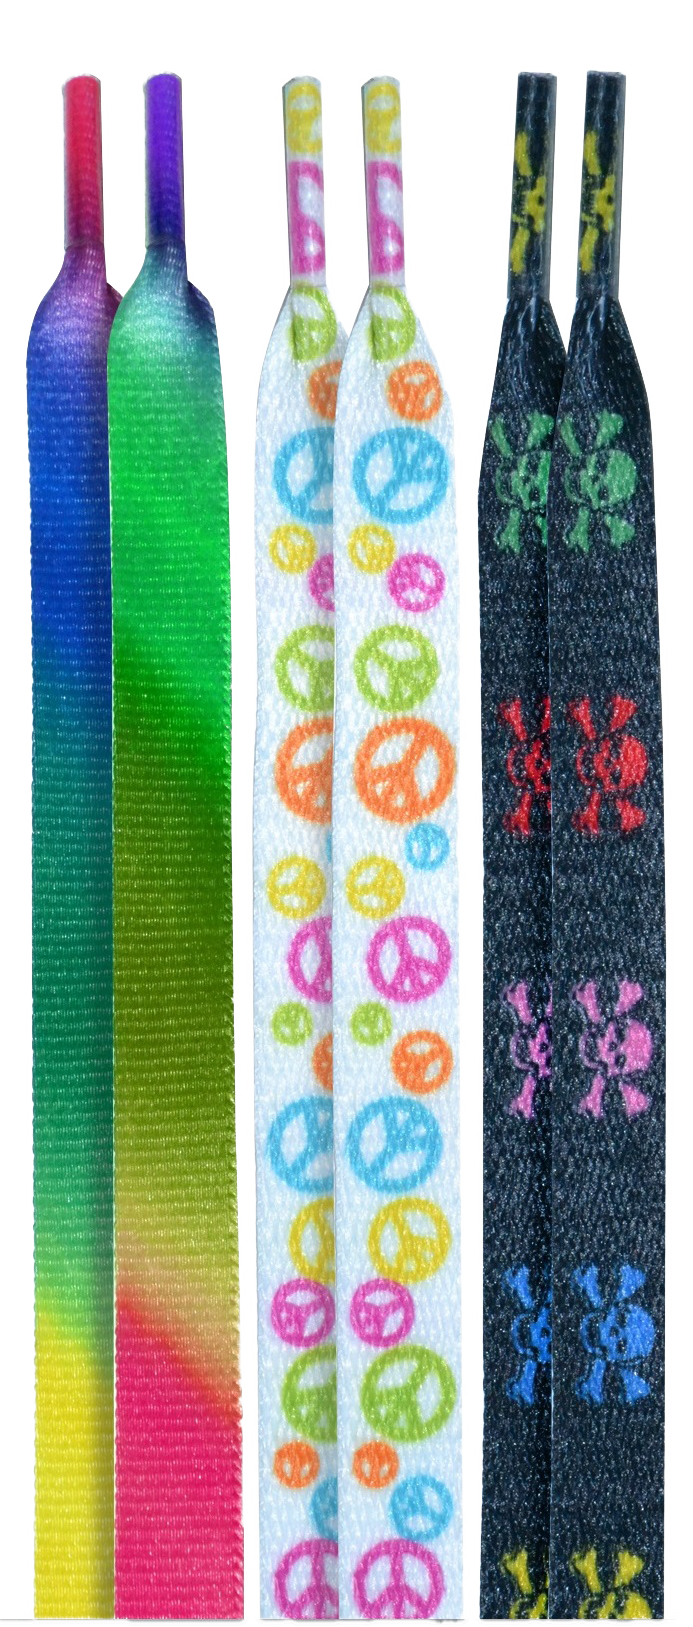 10 Seconds ® Athletic Flat Laces | Tie-Dye/Peace/Multi Skulls Printed - 3 Pack